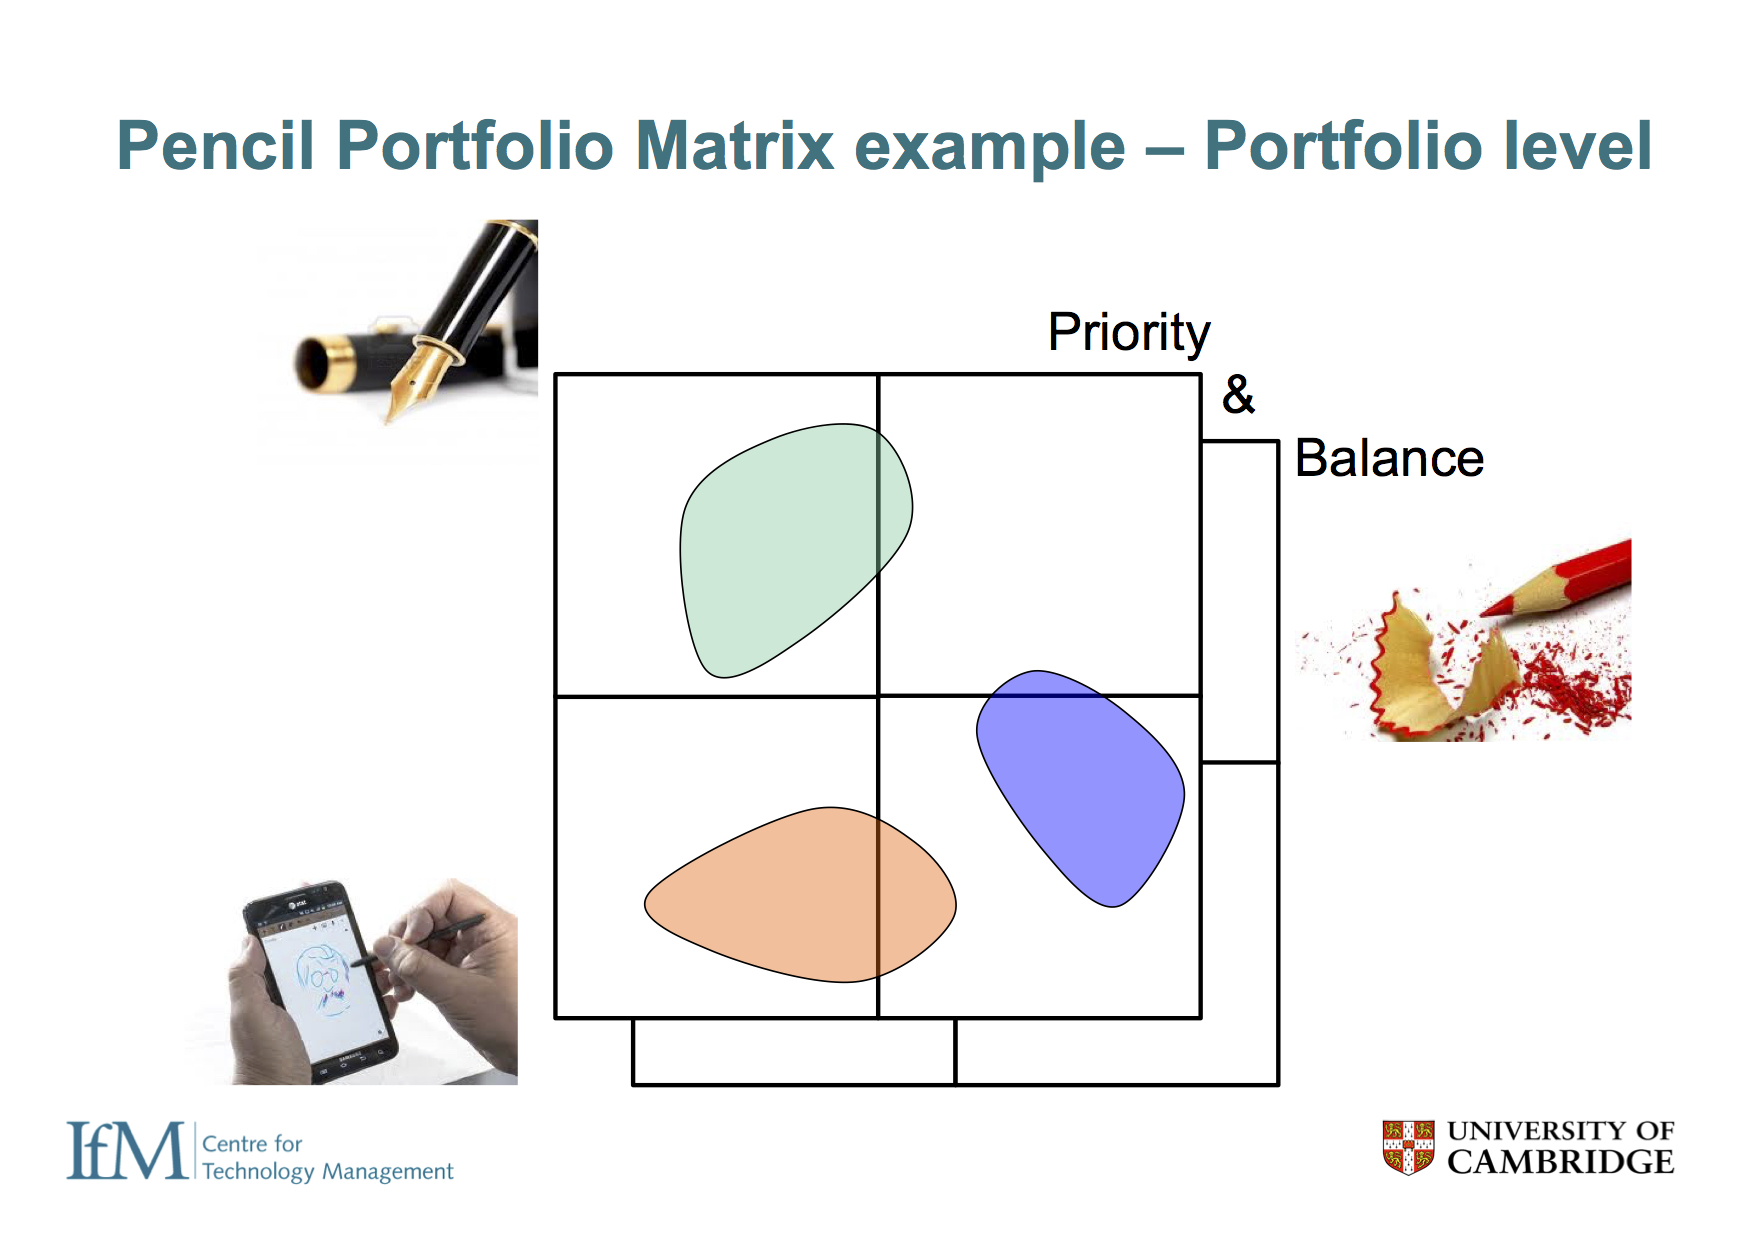  2x2 type matrices are very helpful for prioritisation - for example, should the company focus on pencils, pens or styluses? At the portfolio level these different options can be compared and contrasted, supporting decision making. 